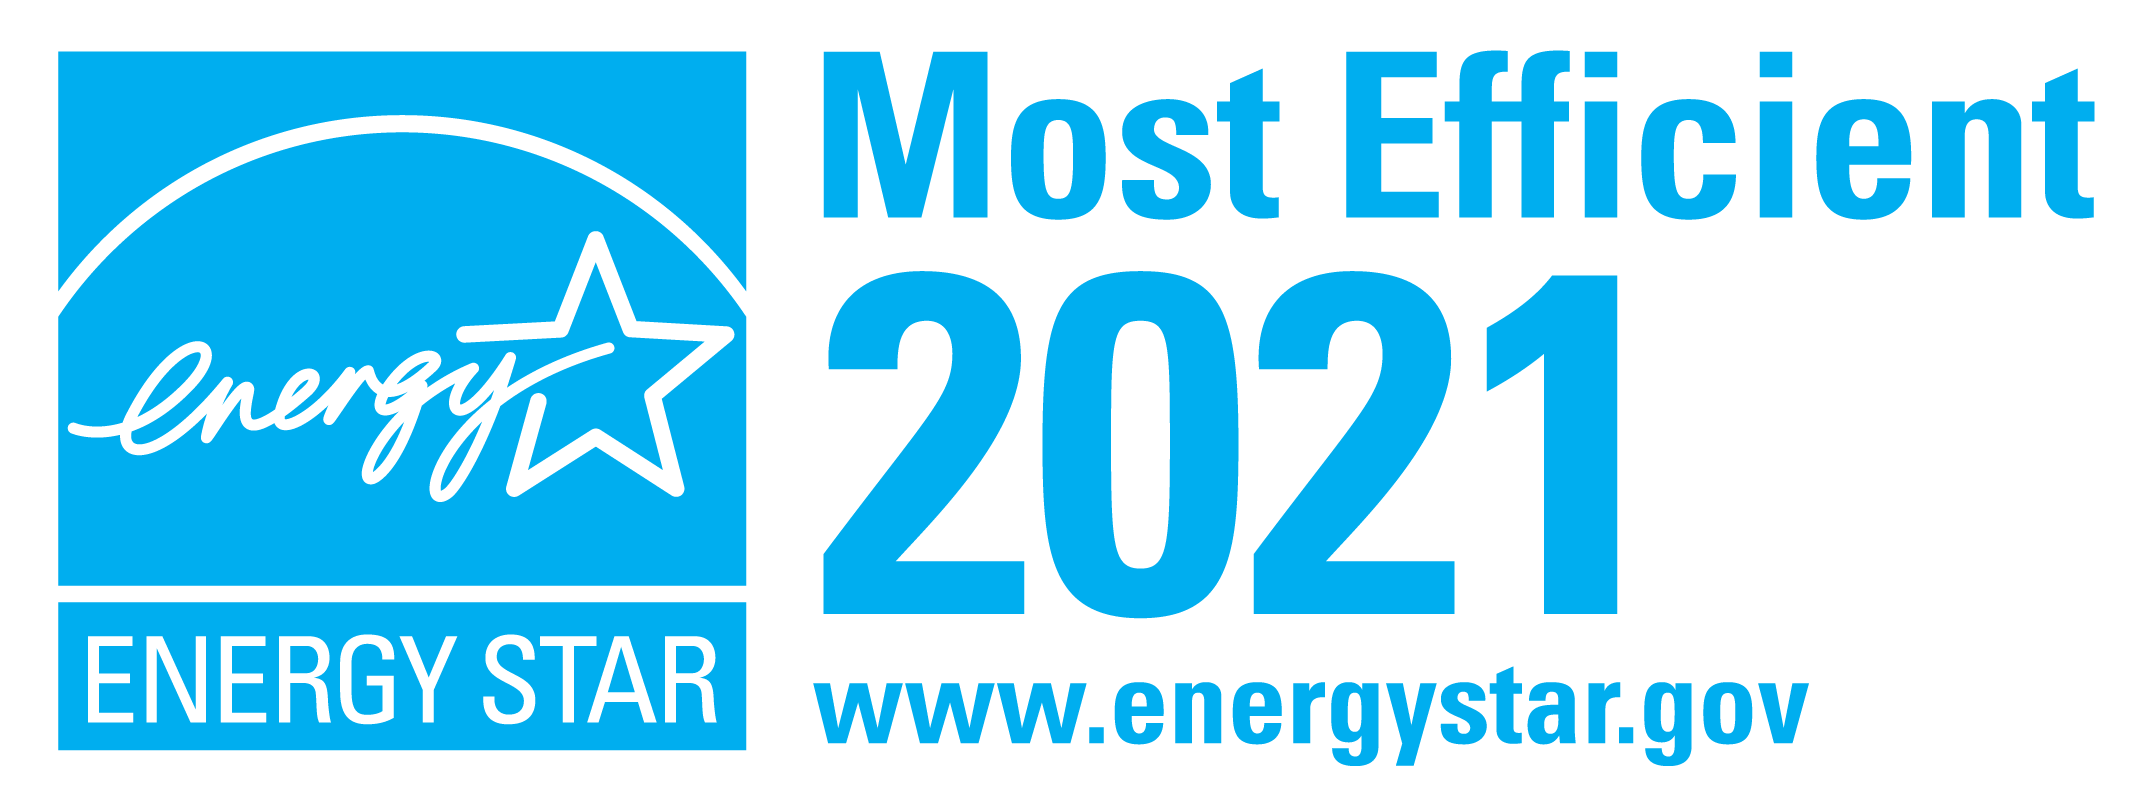 ENERGY STAR Most Efficient 